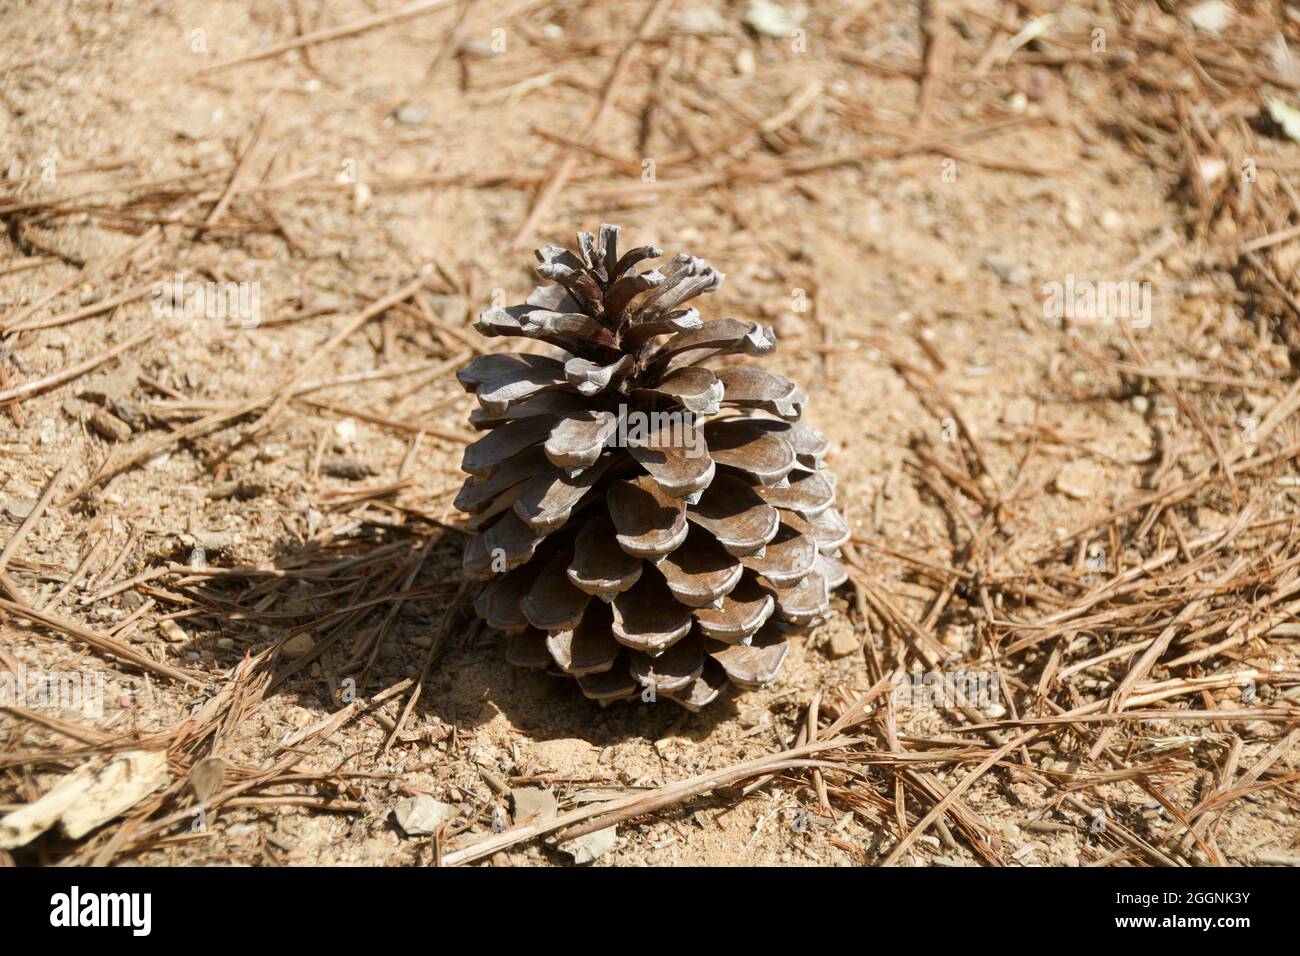 Dried maritime pine cone fallen to the ground in Portugal Stock Photo